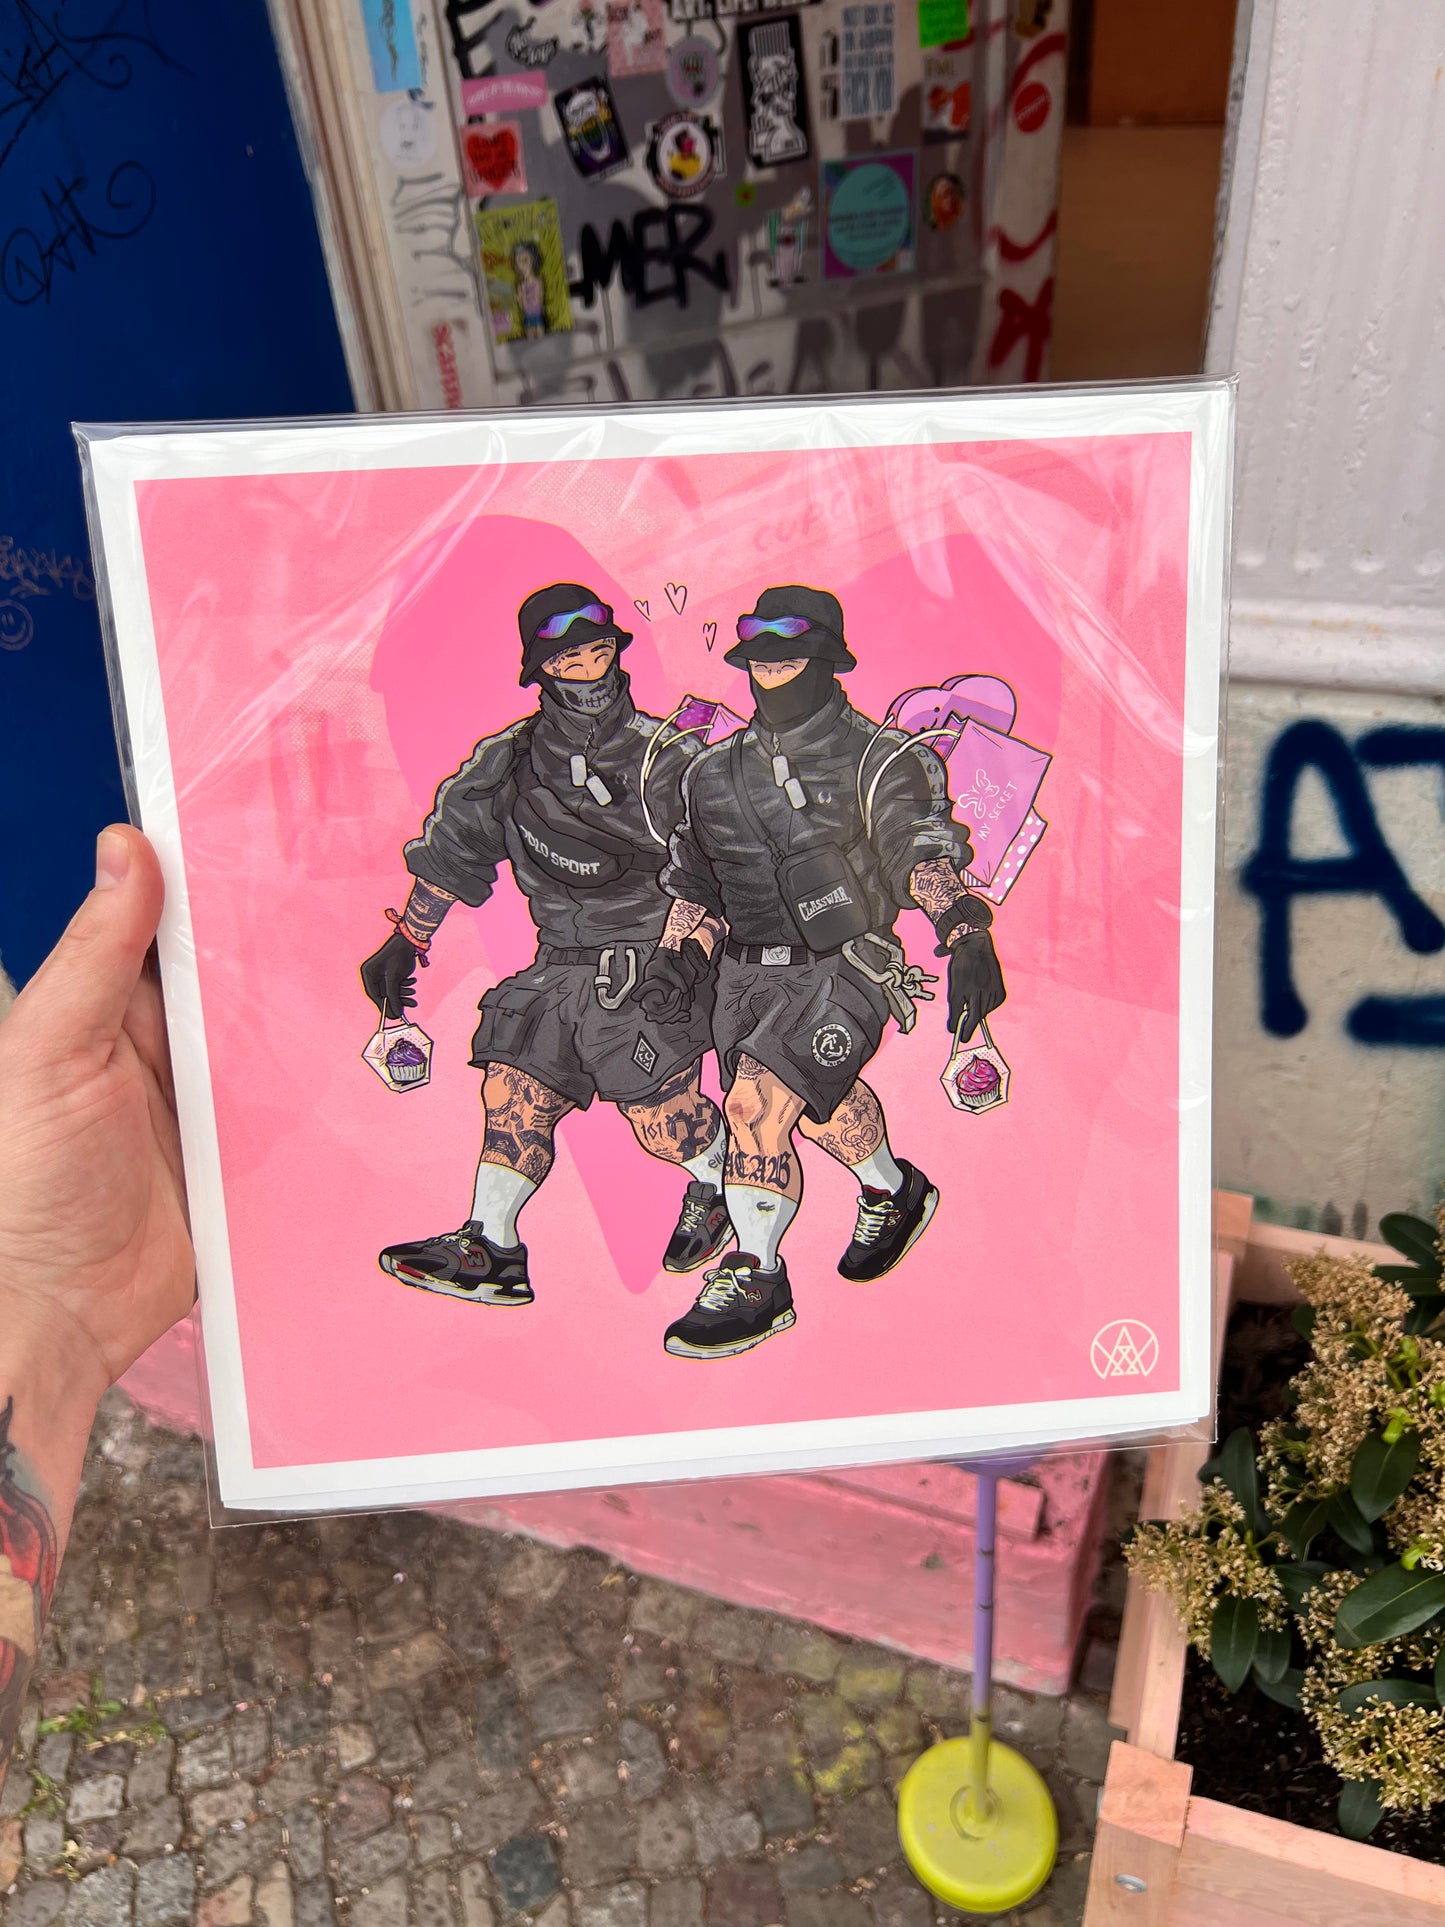 Andy Warlord "This soccer Ultras enjoying their favorite cupcakes after a shopping spree at the mall (2022)" Print 30x30 cm